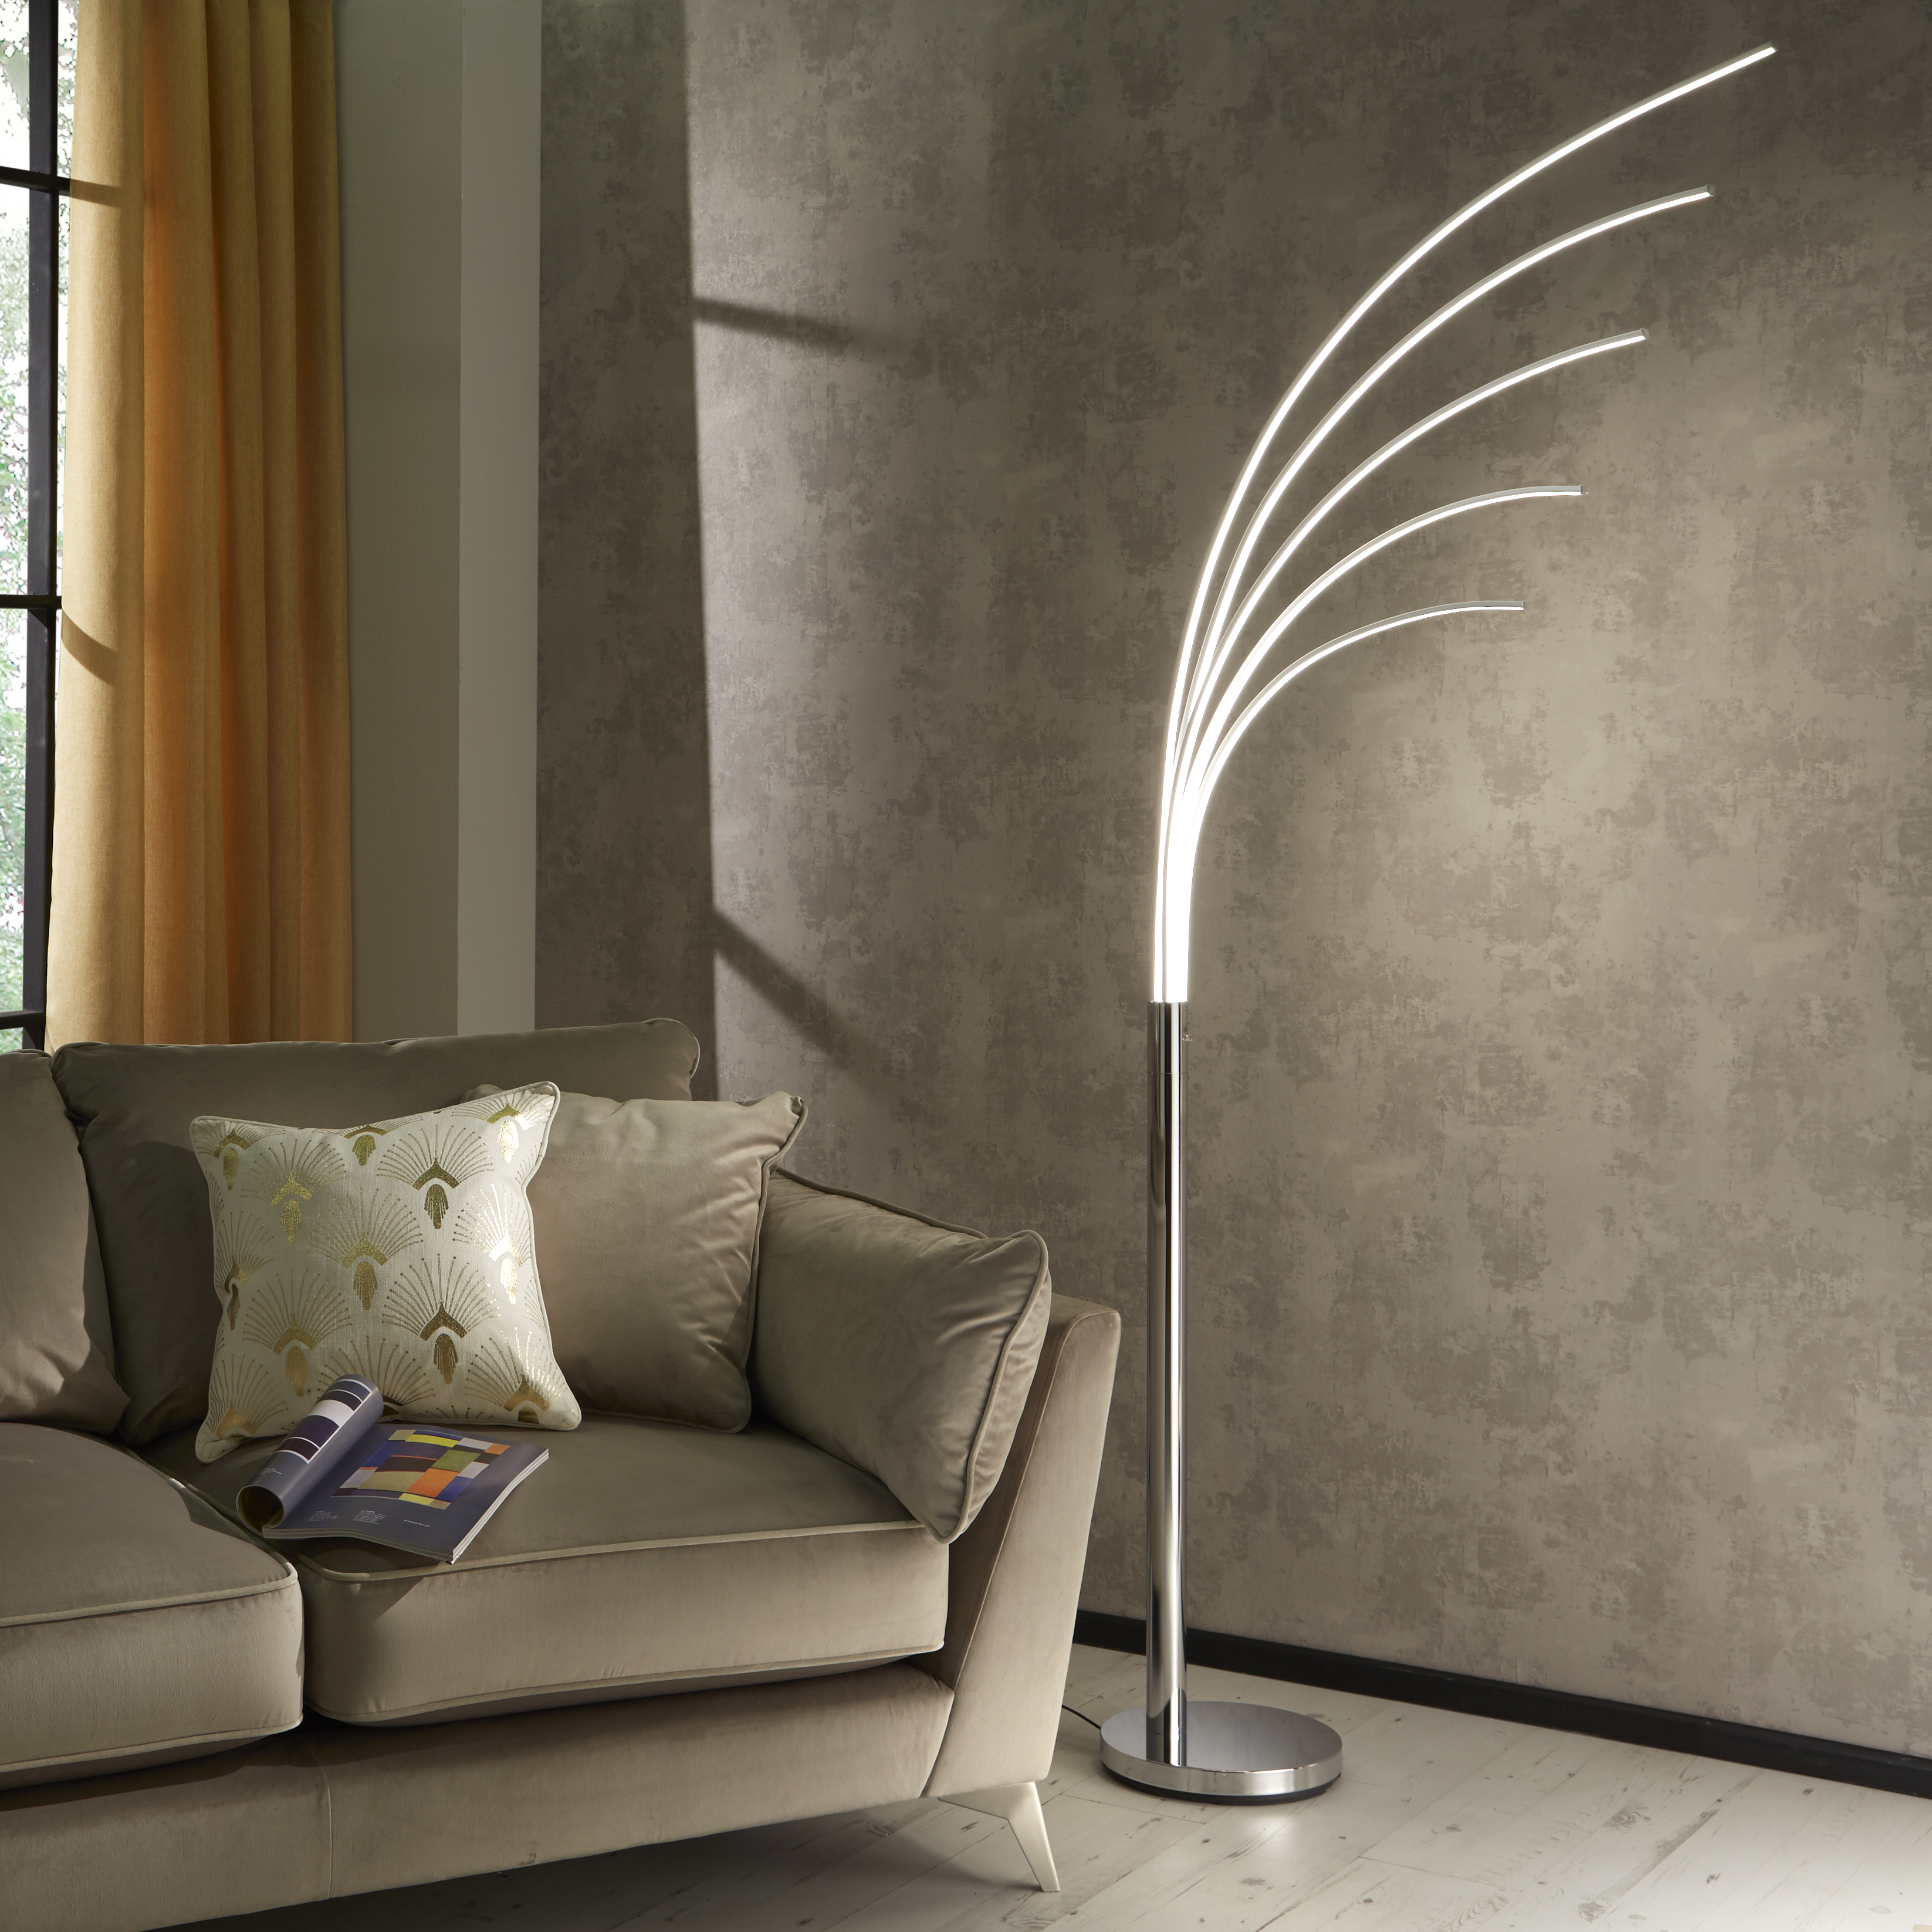 Palm LED 5 Light Arch Chrome Floor Lamp Tall Floor Standing Arched Lamp | eBay